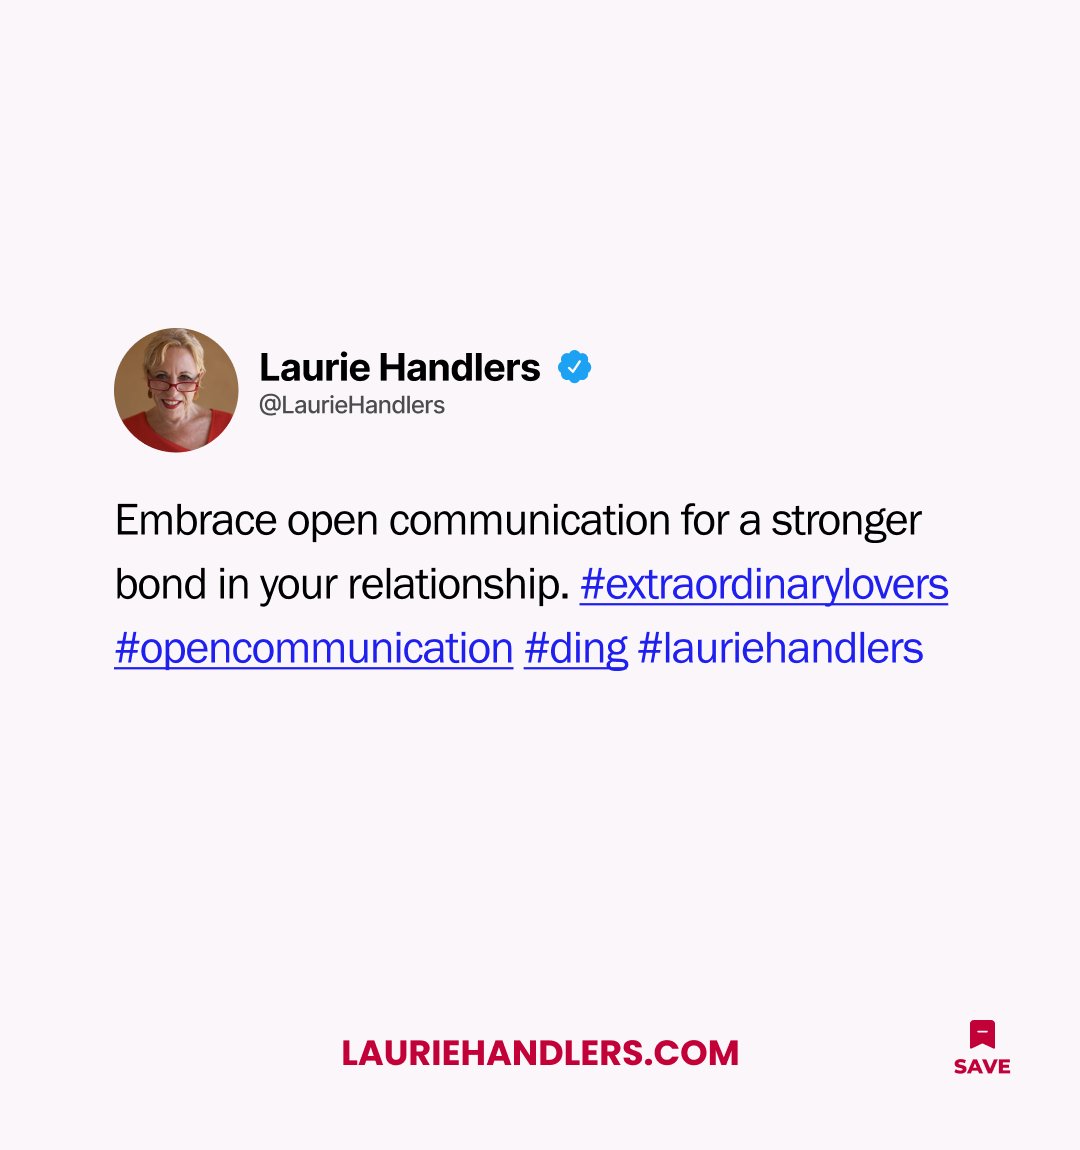 Embrace open talk for a healthier bond 💬 Being vulnerable is tough but essential for a strong connection 🔄 Share your truth, listen with an open 💖 #lauriehandlers #ding #extraordinarylovers